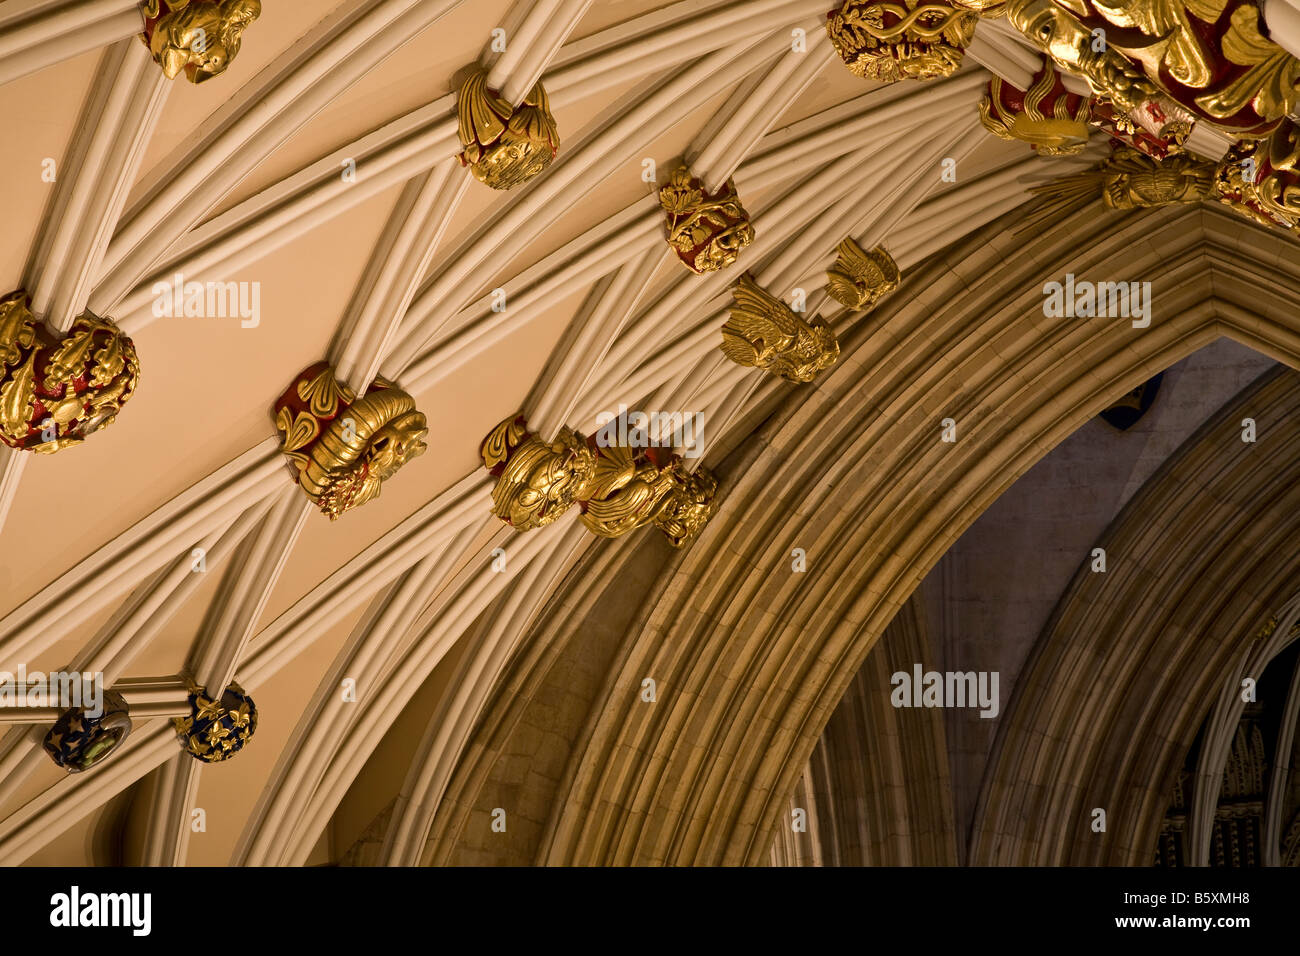 The restored South Transept roof of York Minster, York, England, showing the Gilded wooden headstones. Stock Photo